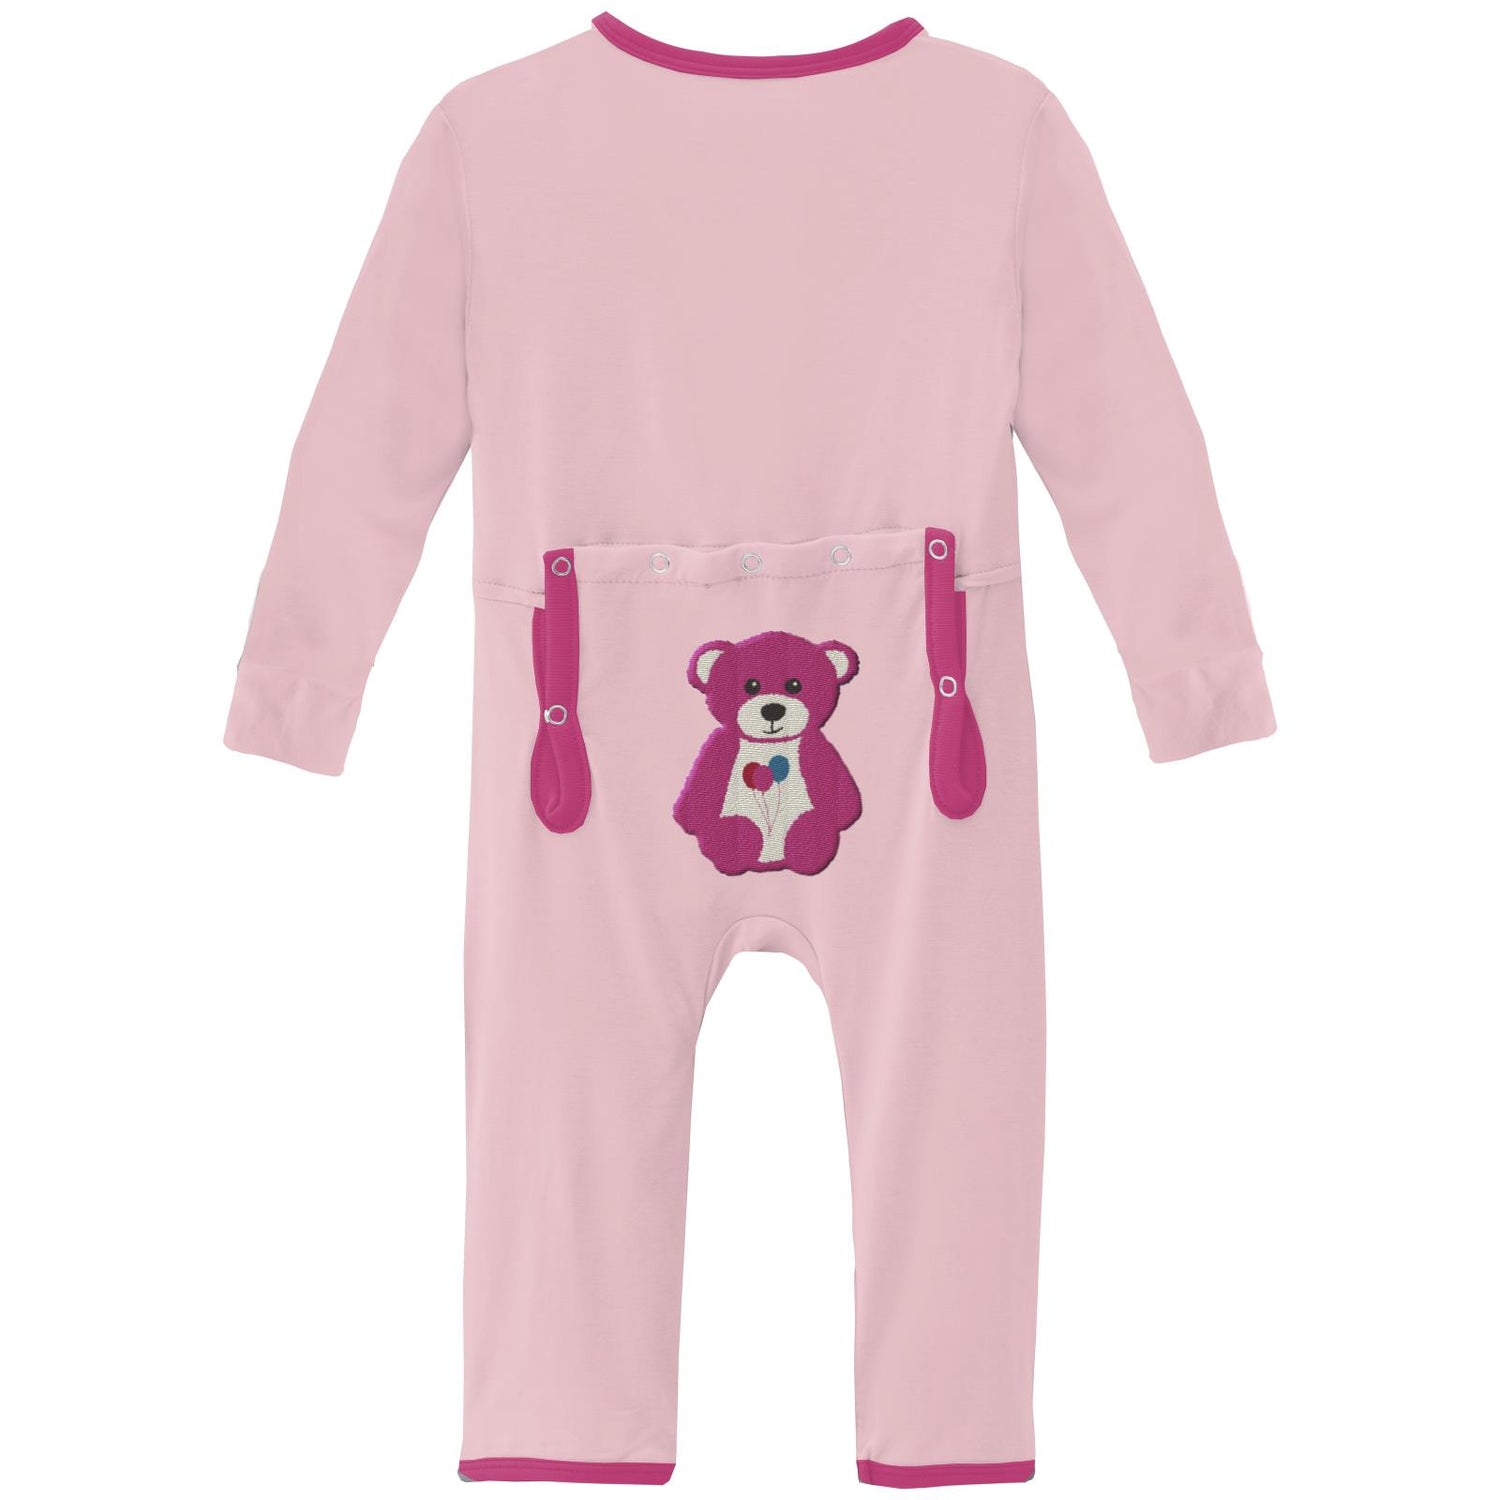 Applique Coverall with 2 Way Zipper in Lotus Happy Teddy